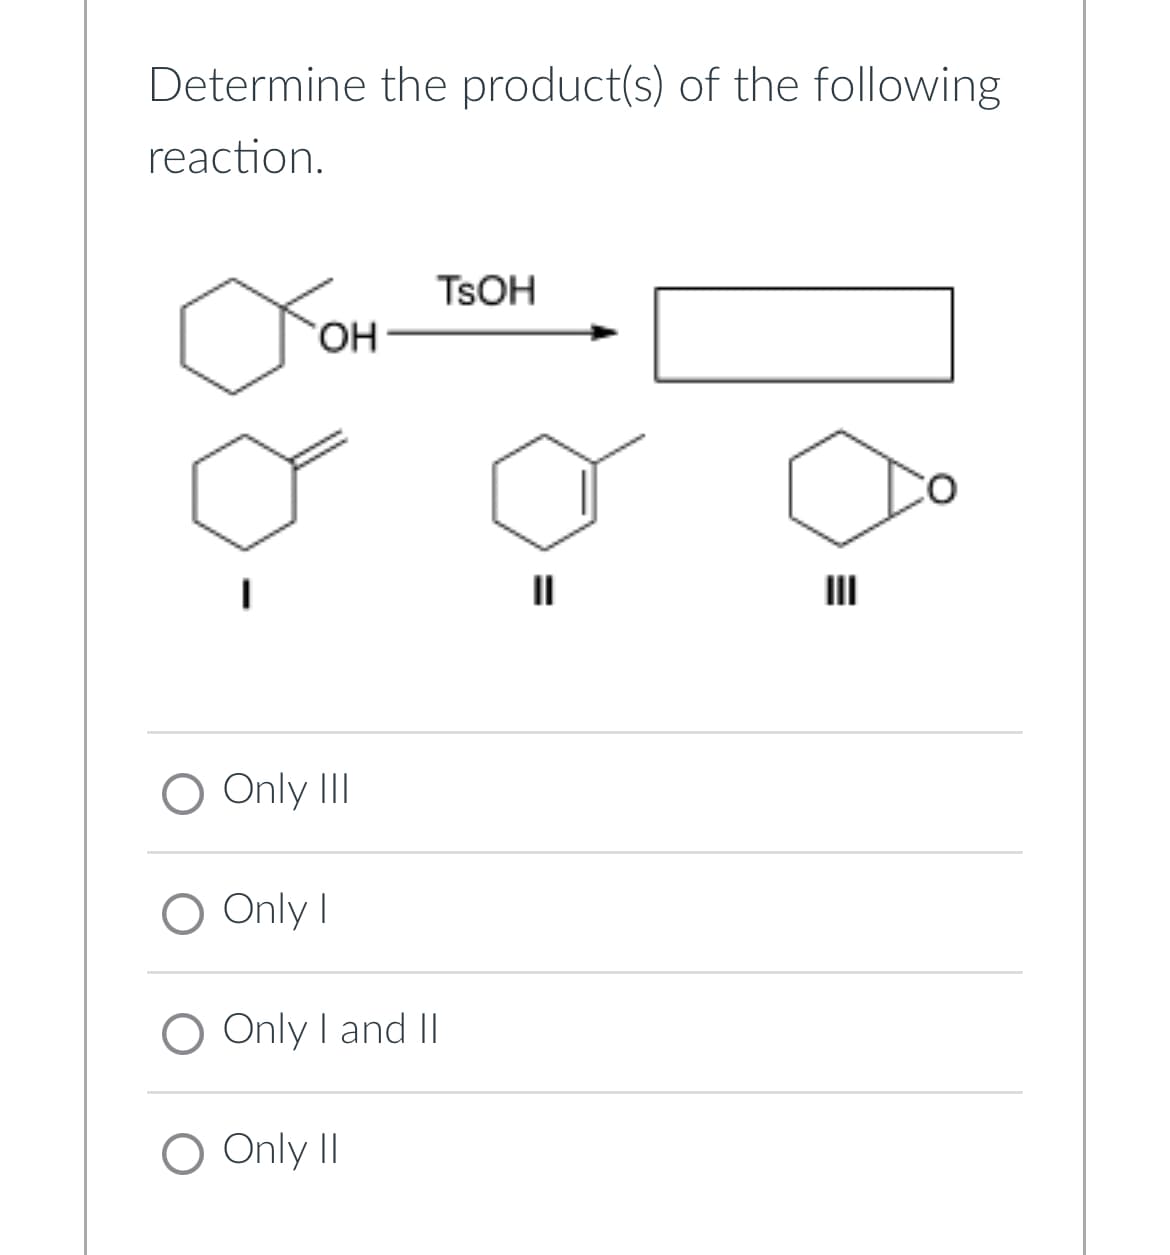 Determine the product(s) of the following
reaction.
Ого
TSOH
OH
||
O Only III
○ Only I
O Only I and II
O Only II
=
III